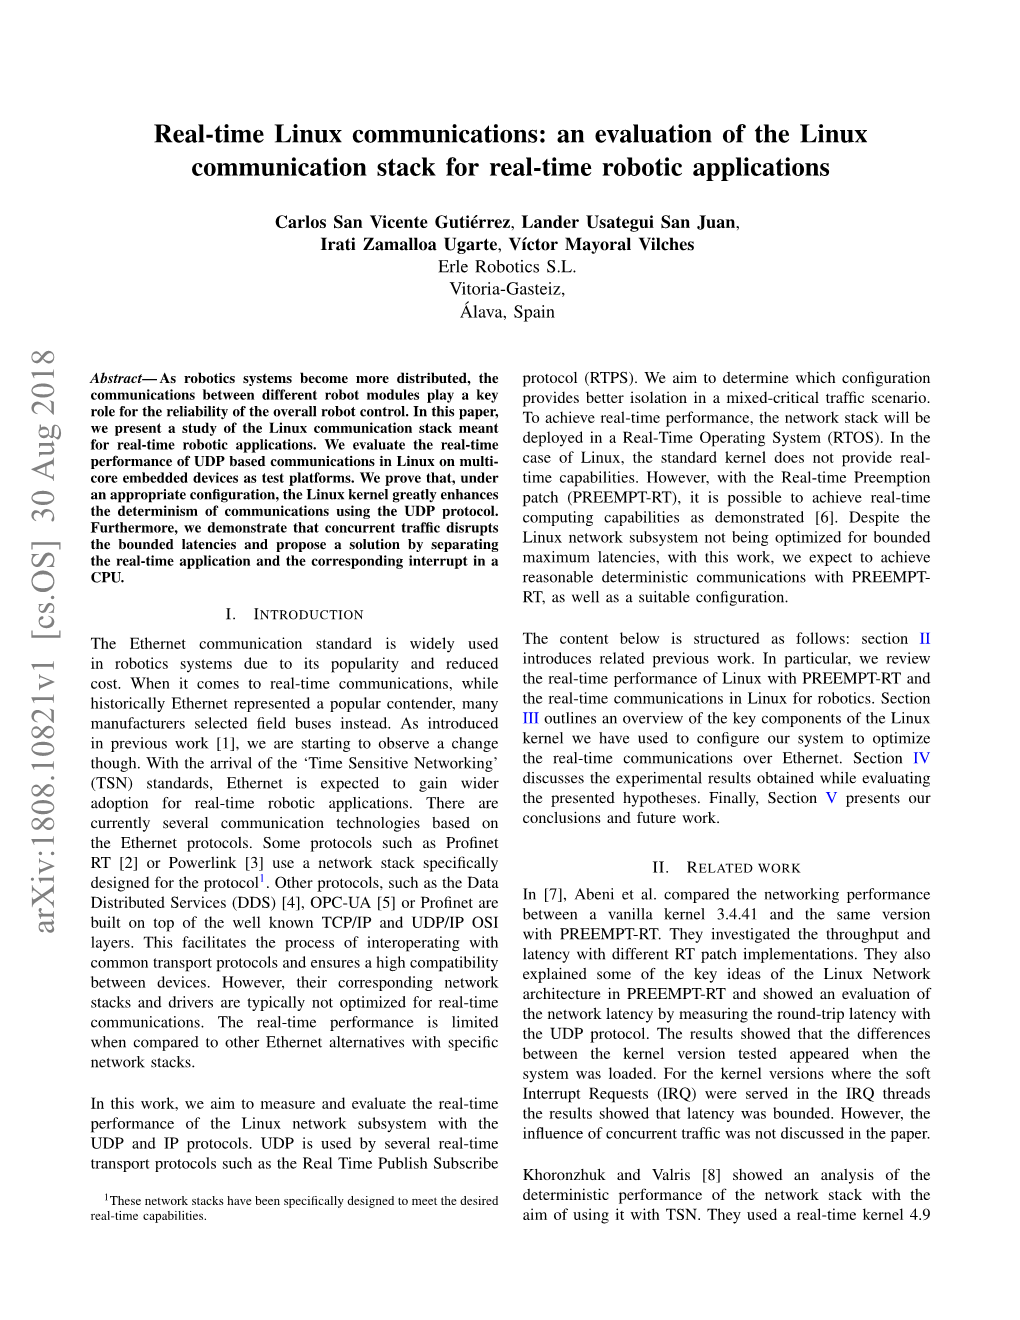 An Evaluation of the Linux Communication Stack for Real-Time Robotic Applications